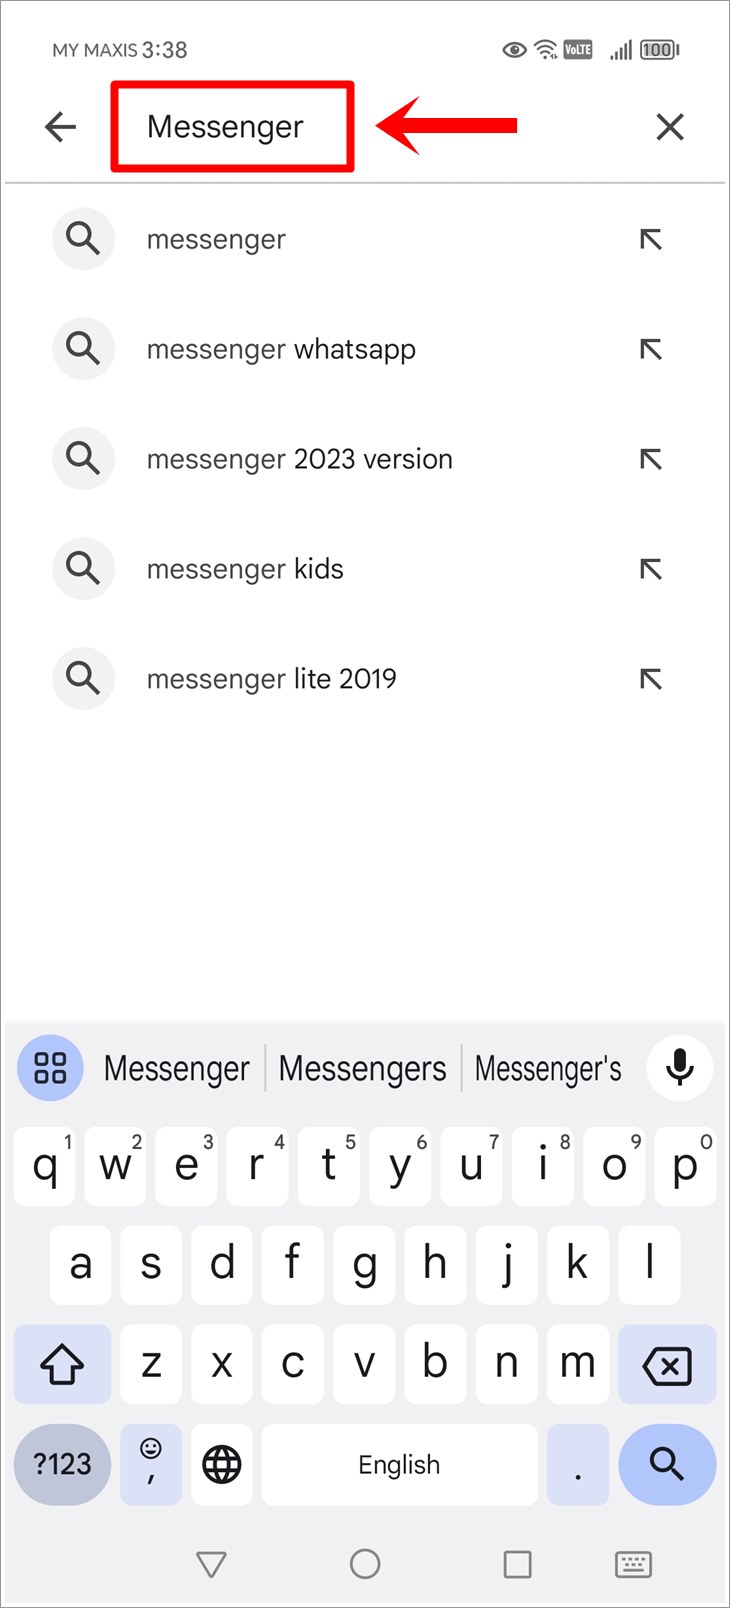 This is a screenshot of an Android phone. It shows that the word 'Messenger' has been entered in the Play Store search box.